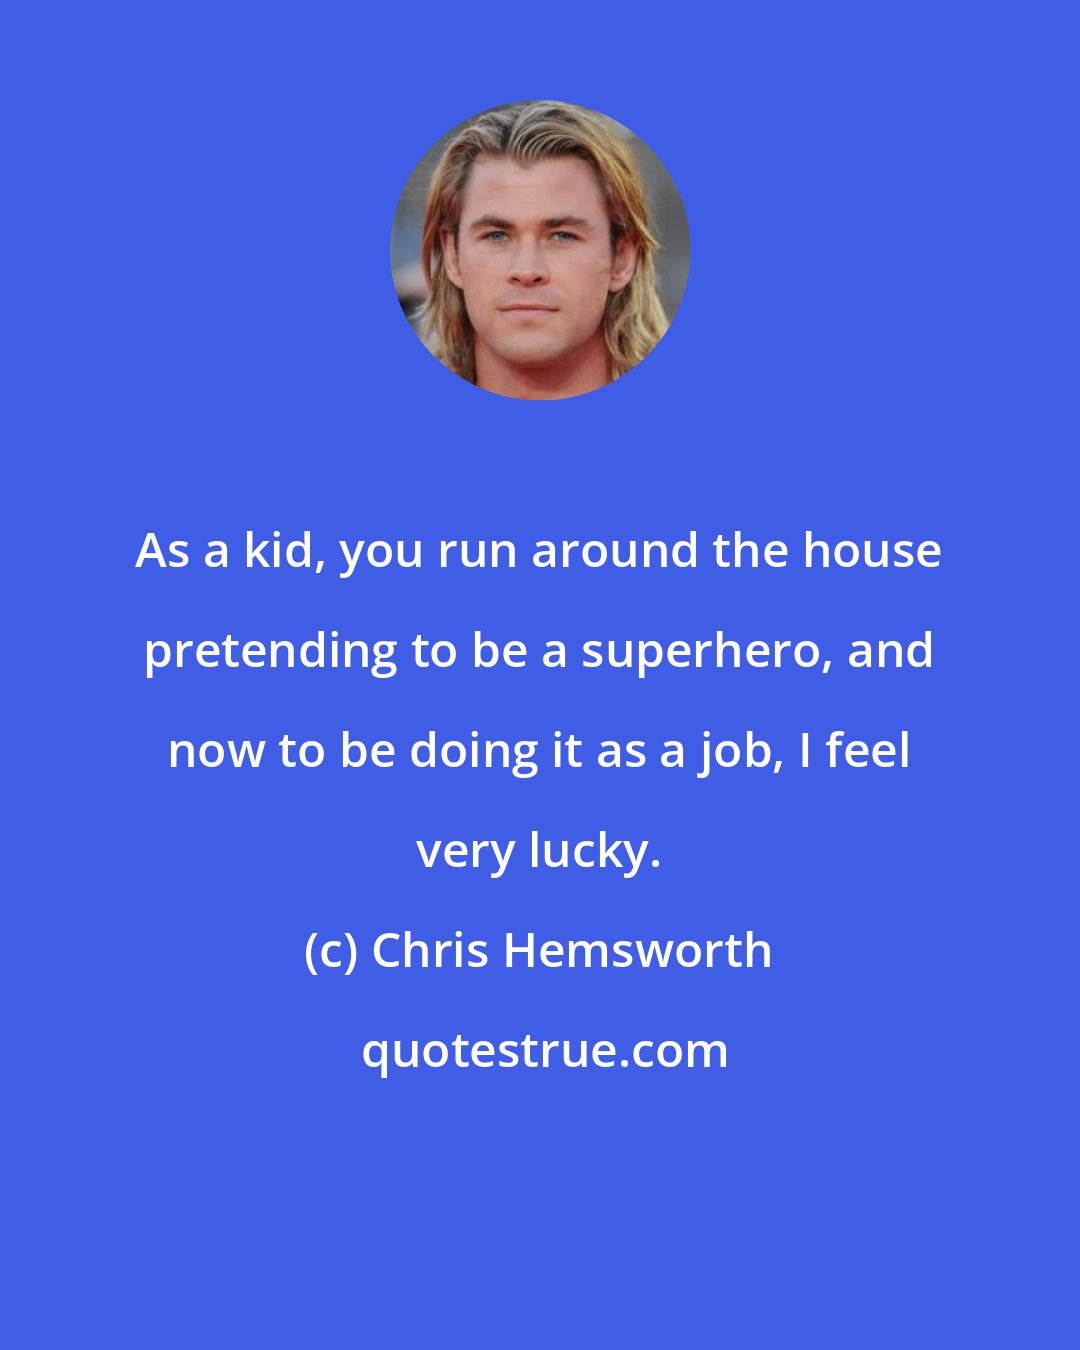 Chris Hemsworth: As a kid, you run around the house pretending to be a superhero, and now to be doing it as a job, I feel very lucky.